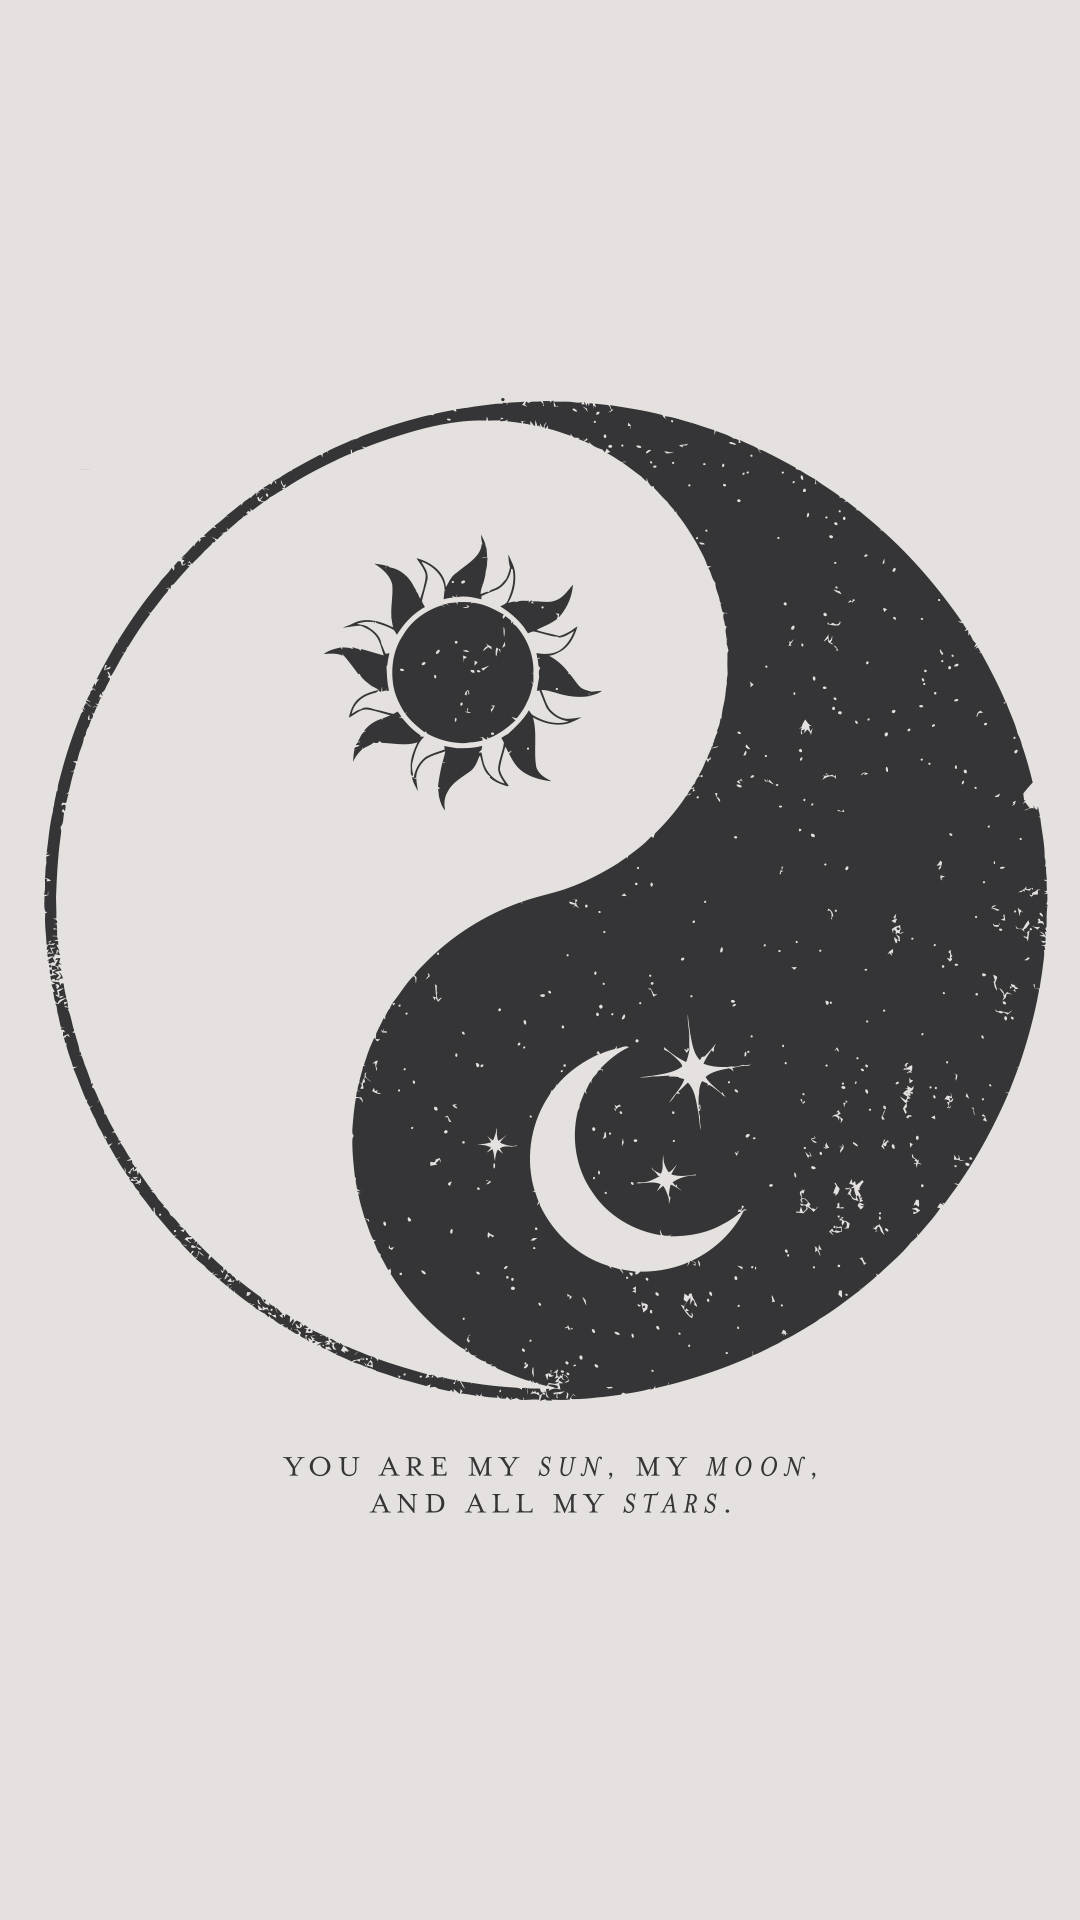 999 Yin Yang Pictures  Download Free Images on Unsplash